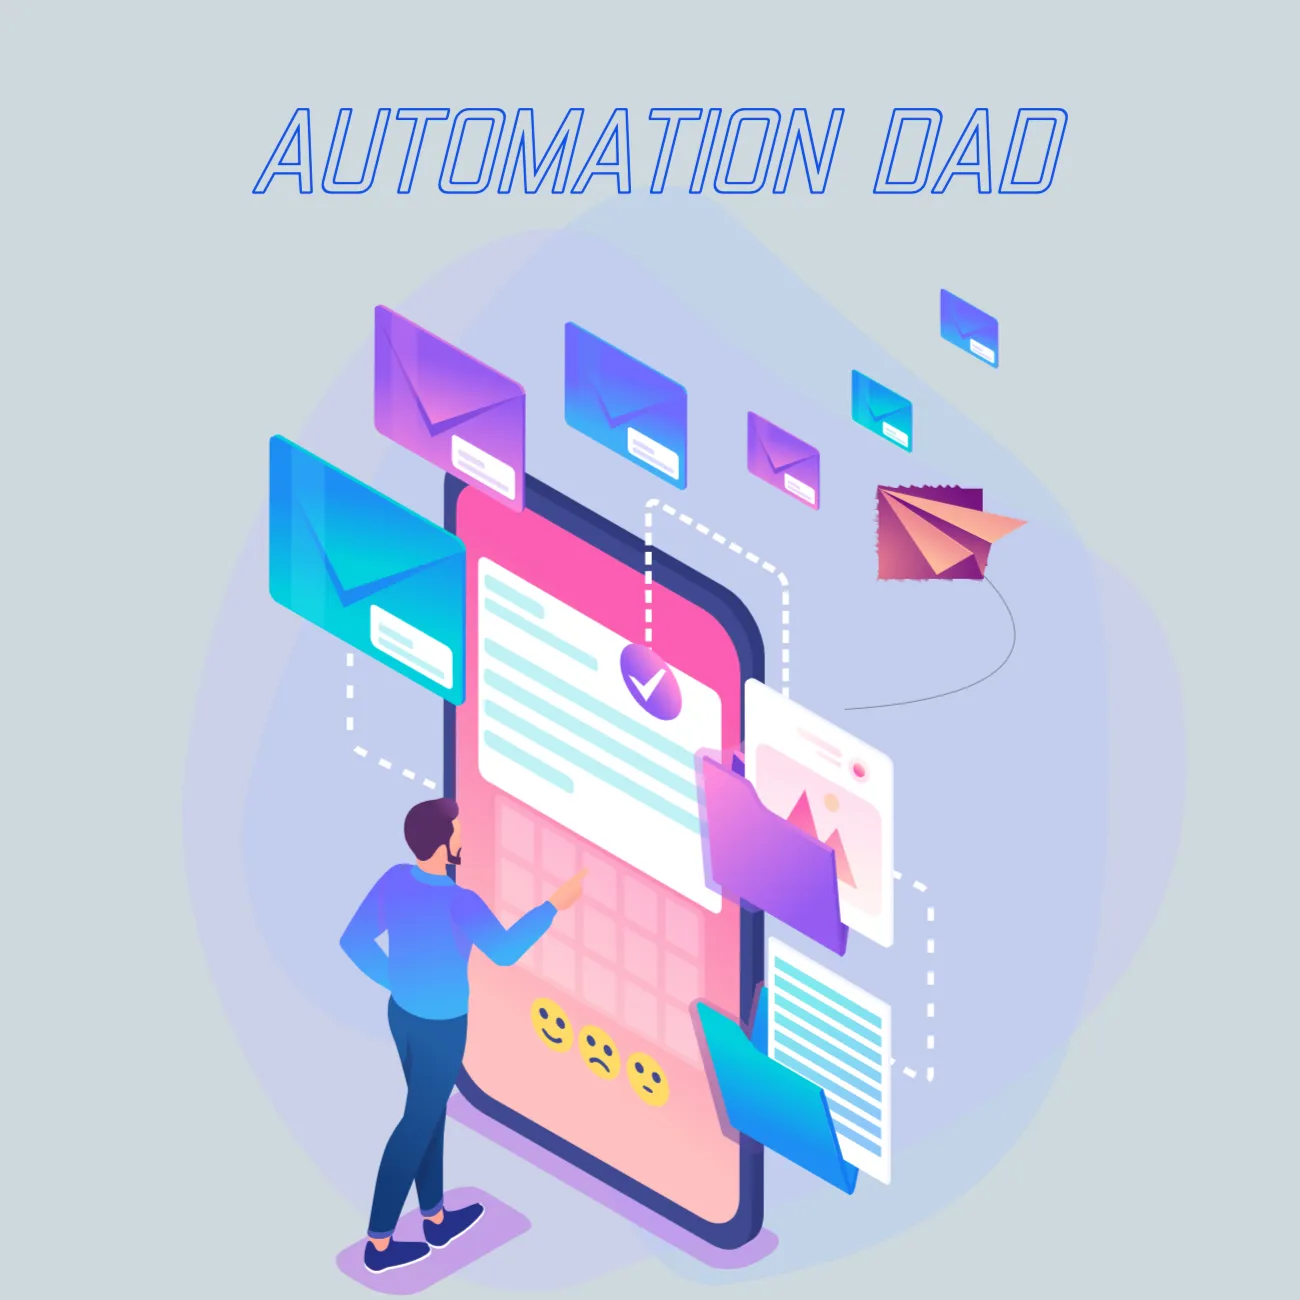 Automation Dad